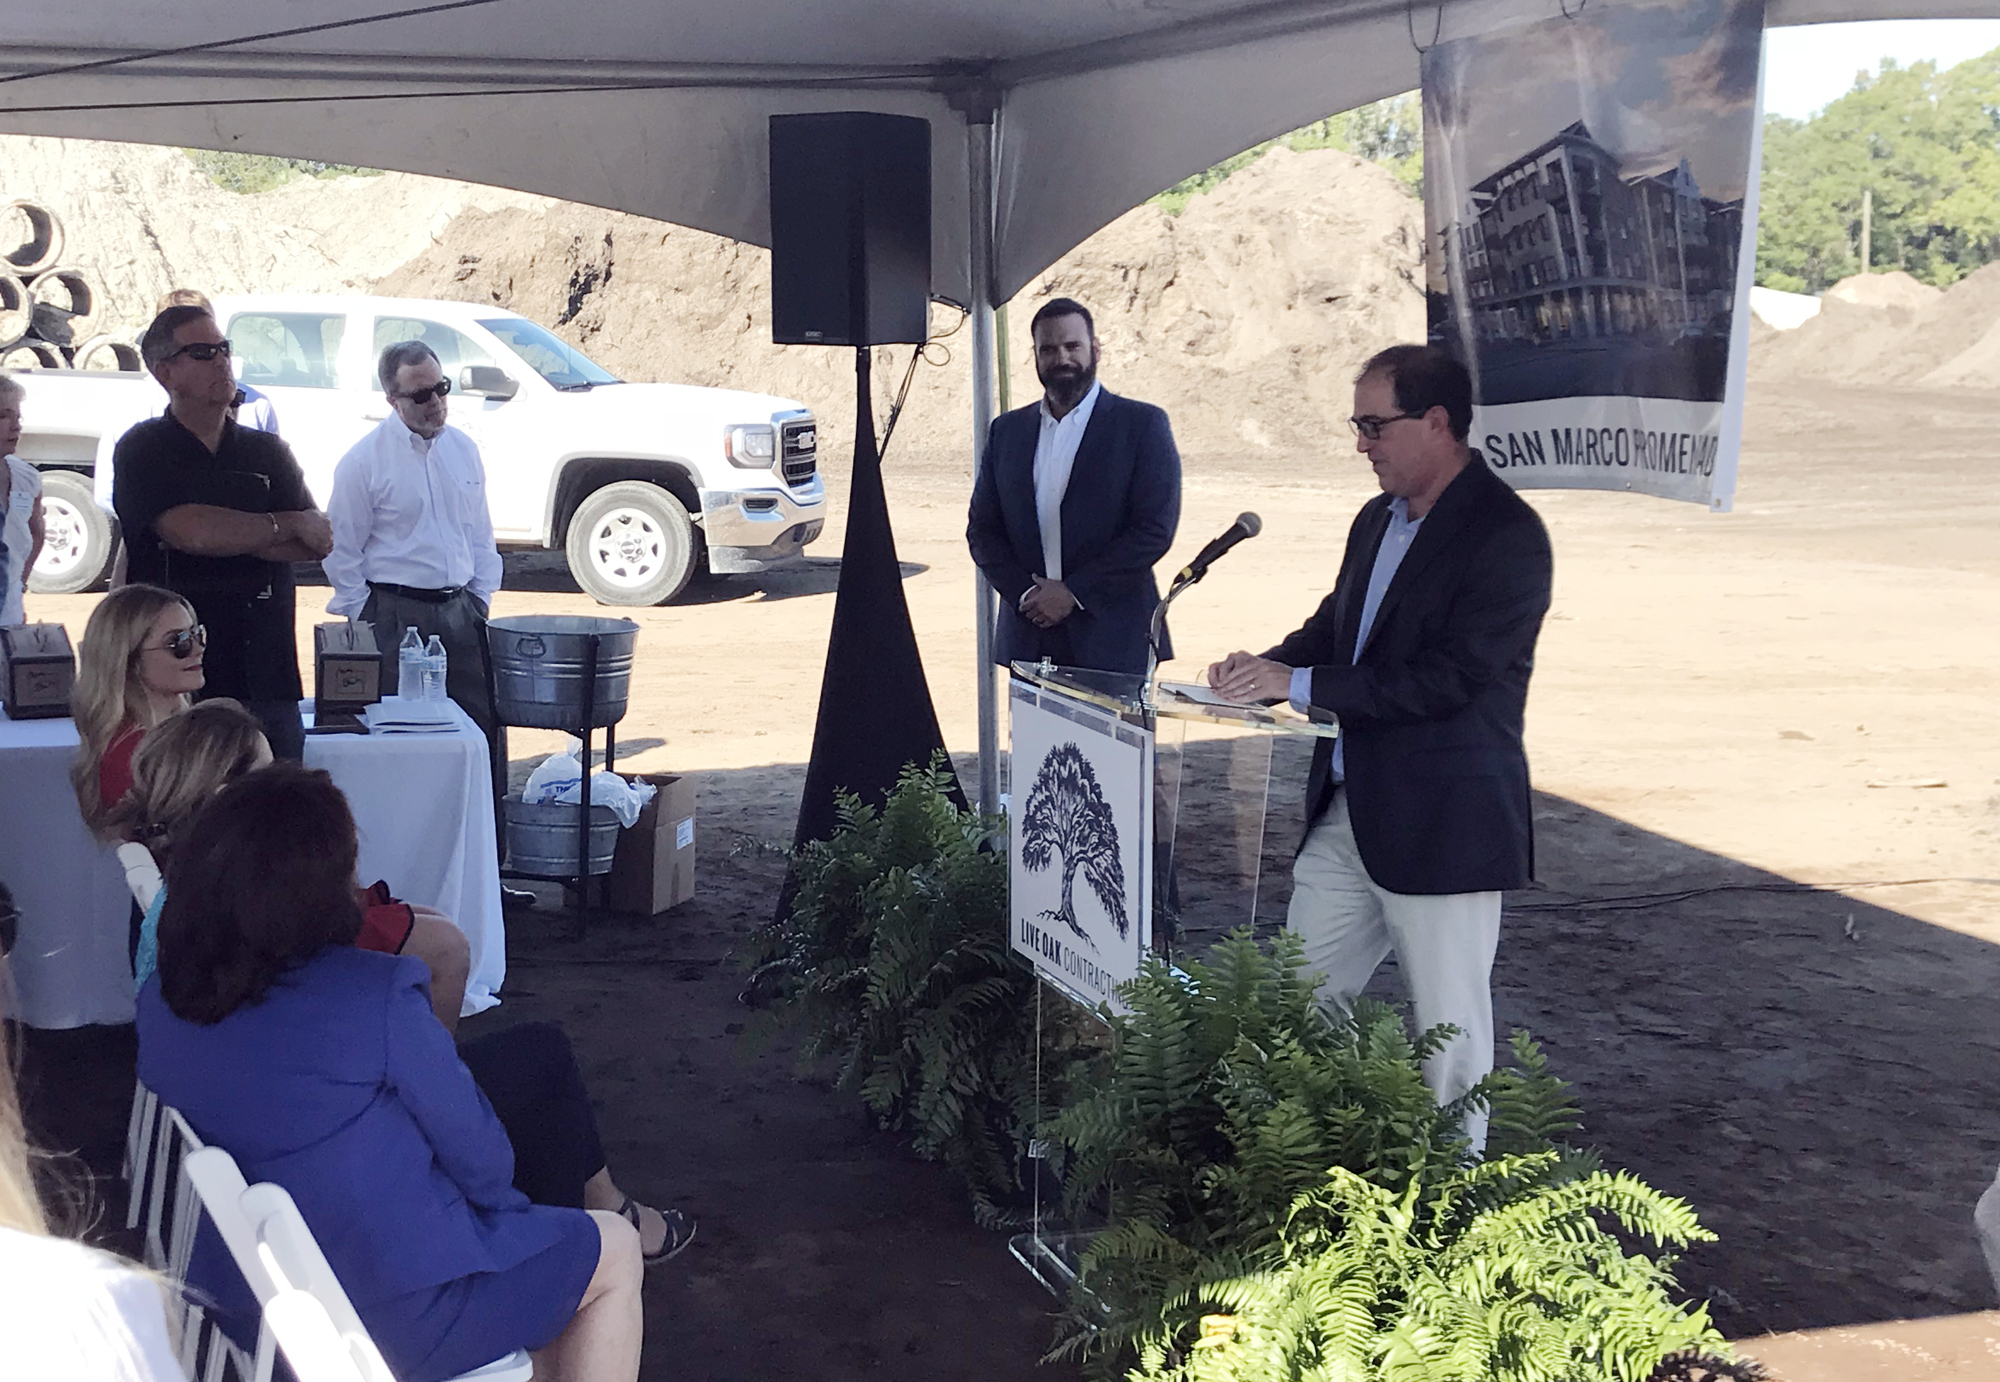 Paul Bertozzi, the president and CEO of Live Oak Contracting, watches as Jeffrey Rosen, a principal partner with Chance Partners, speaks at the groundbreaking ceremony Tuesday.